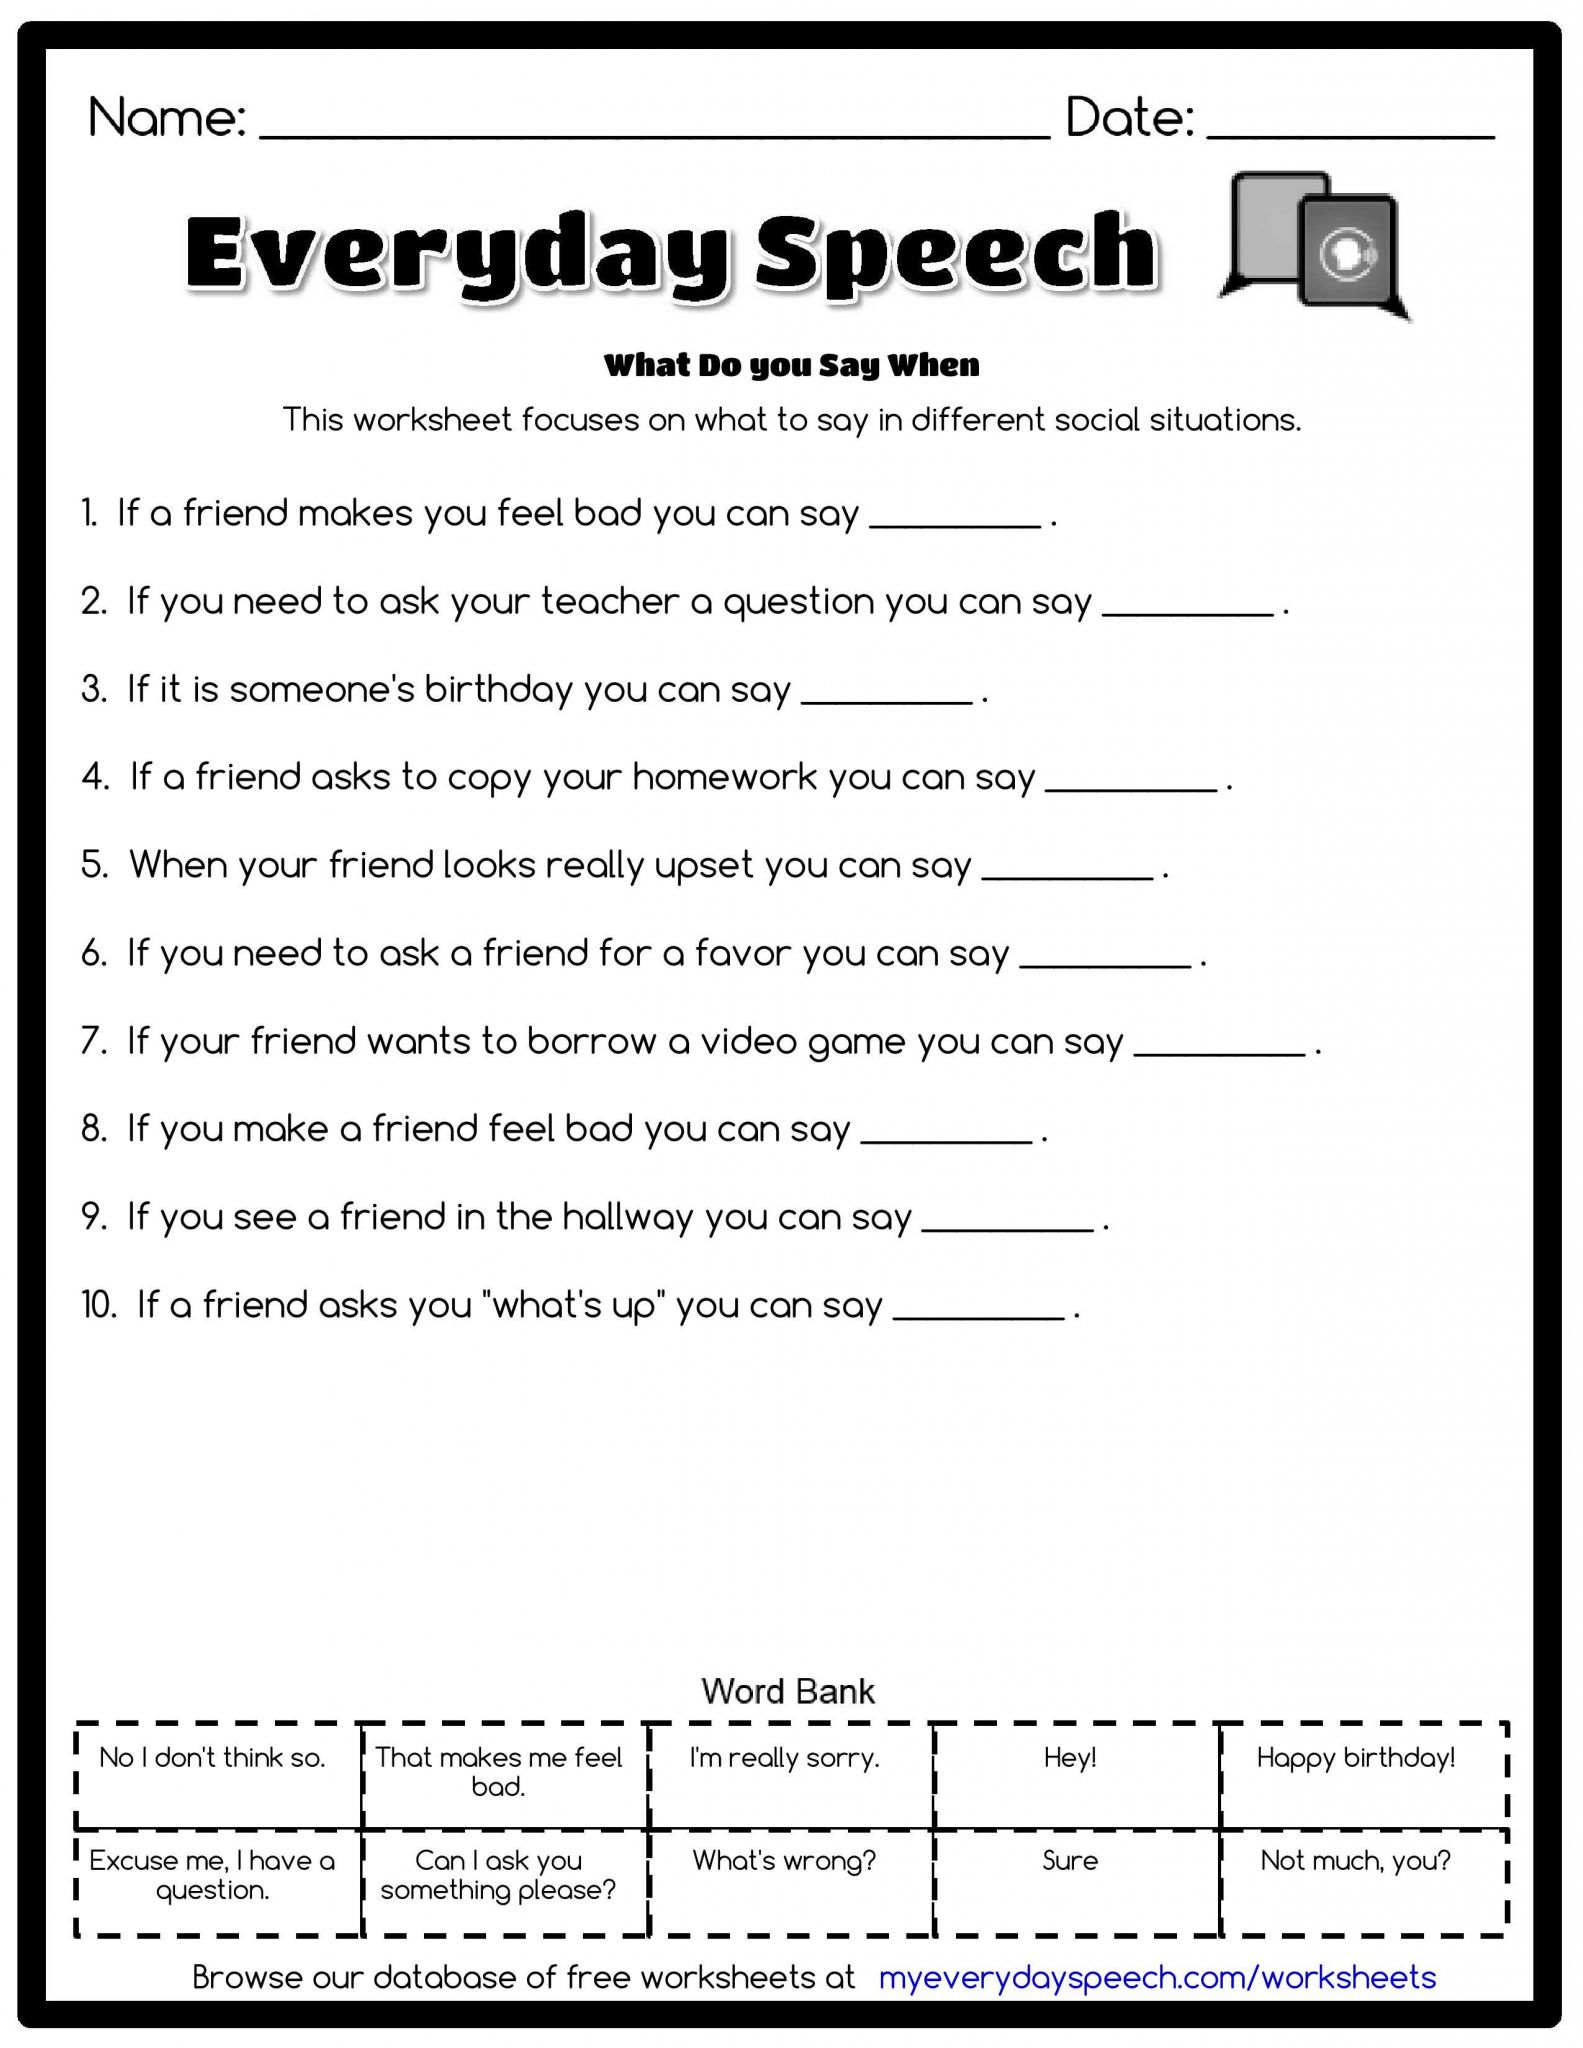 Grocery Shopping Life Skills Worksheet with 200 Most Downloaded Worksheets